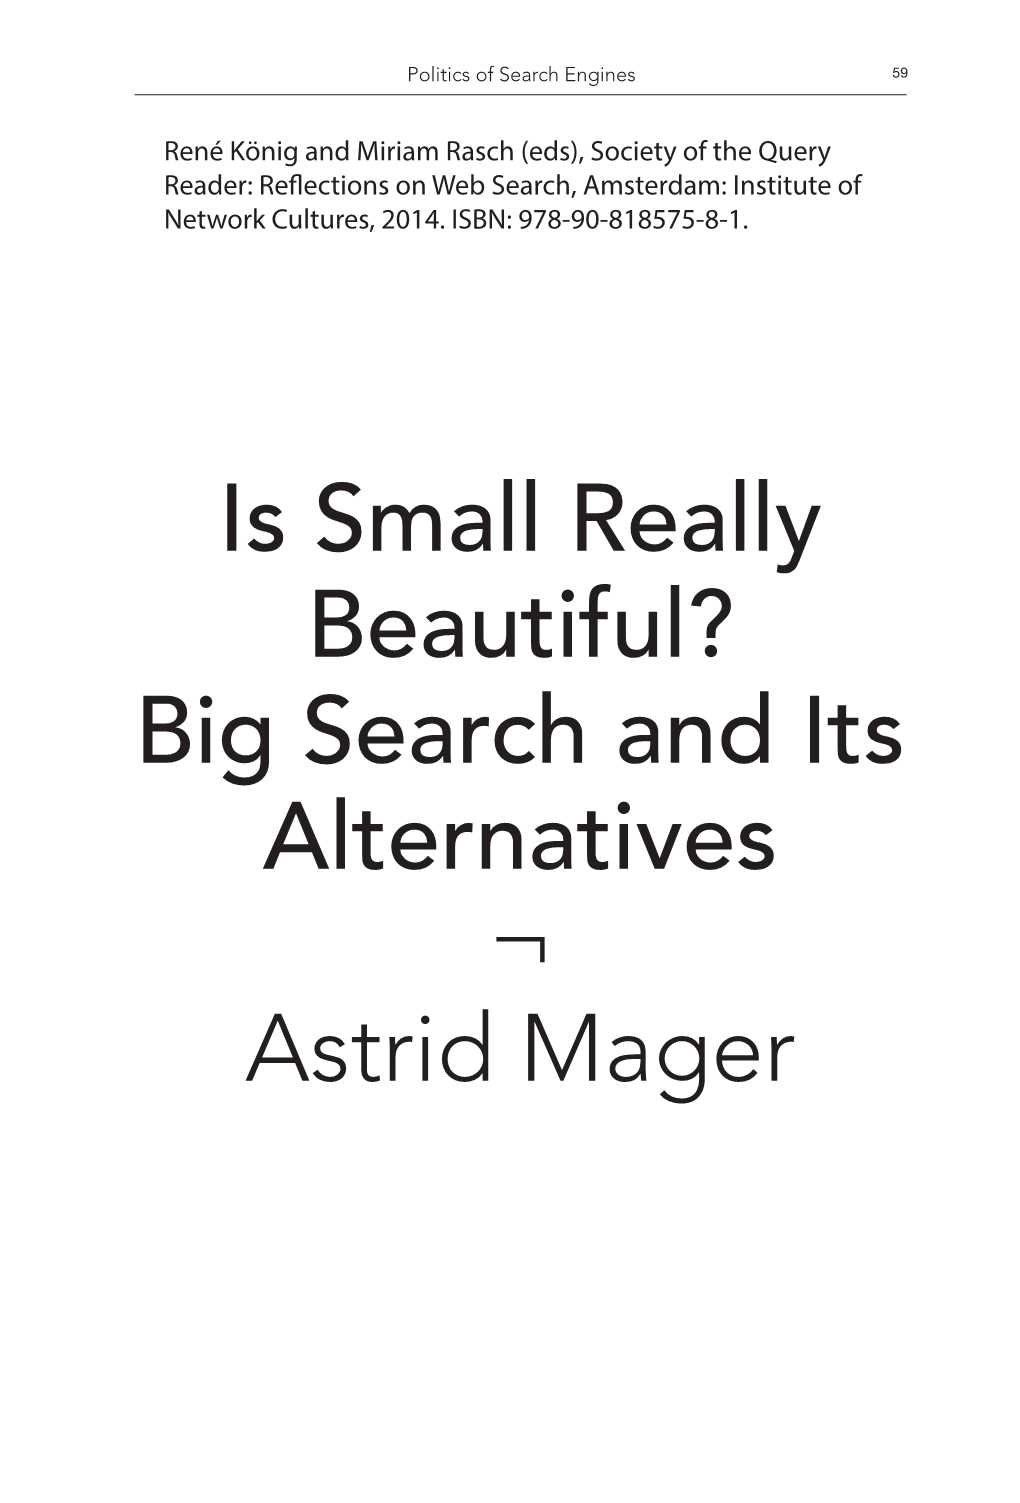 Is Small Really Beautiful? Big Search and Its Alternatives ¬ Astrid Mager 60 Society of the Query Reader